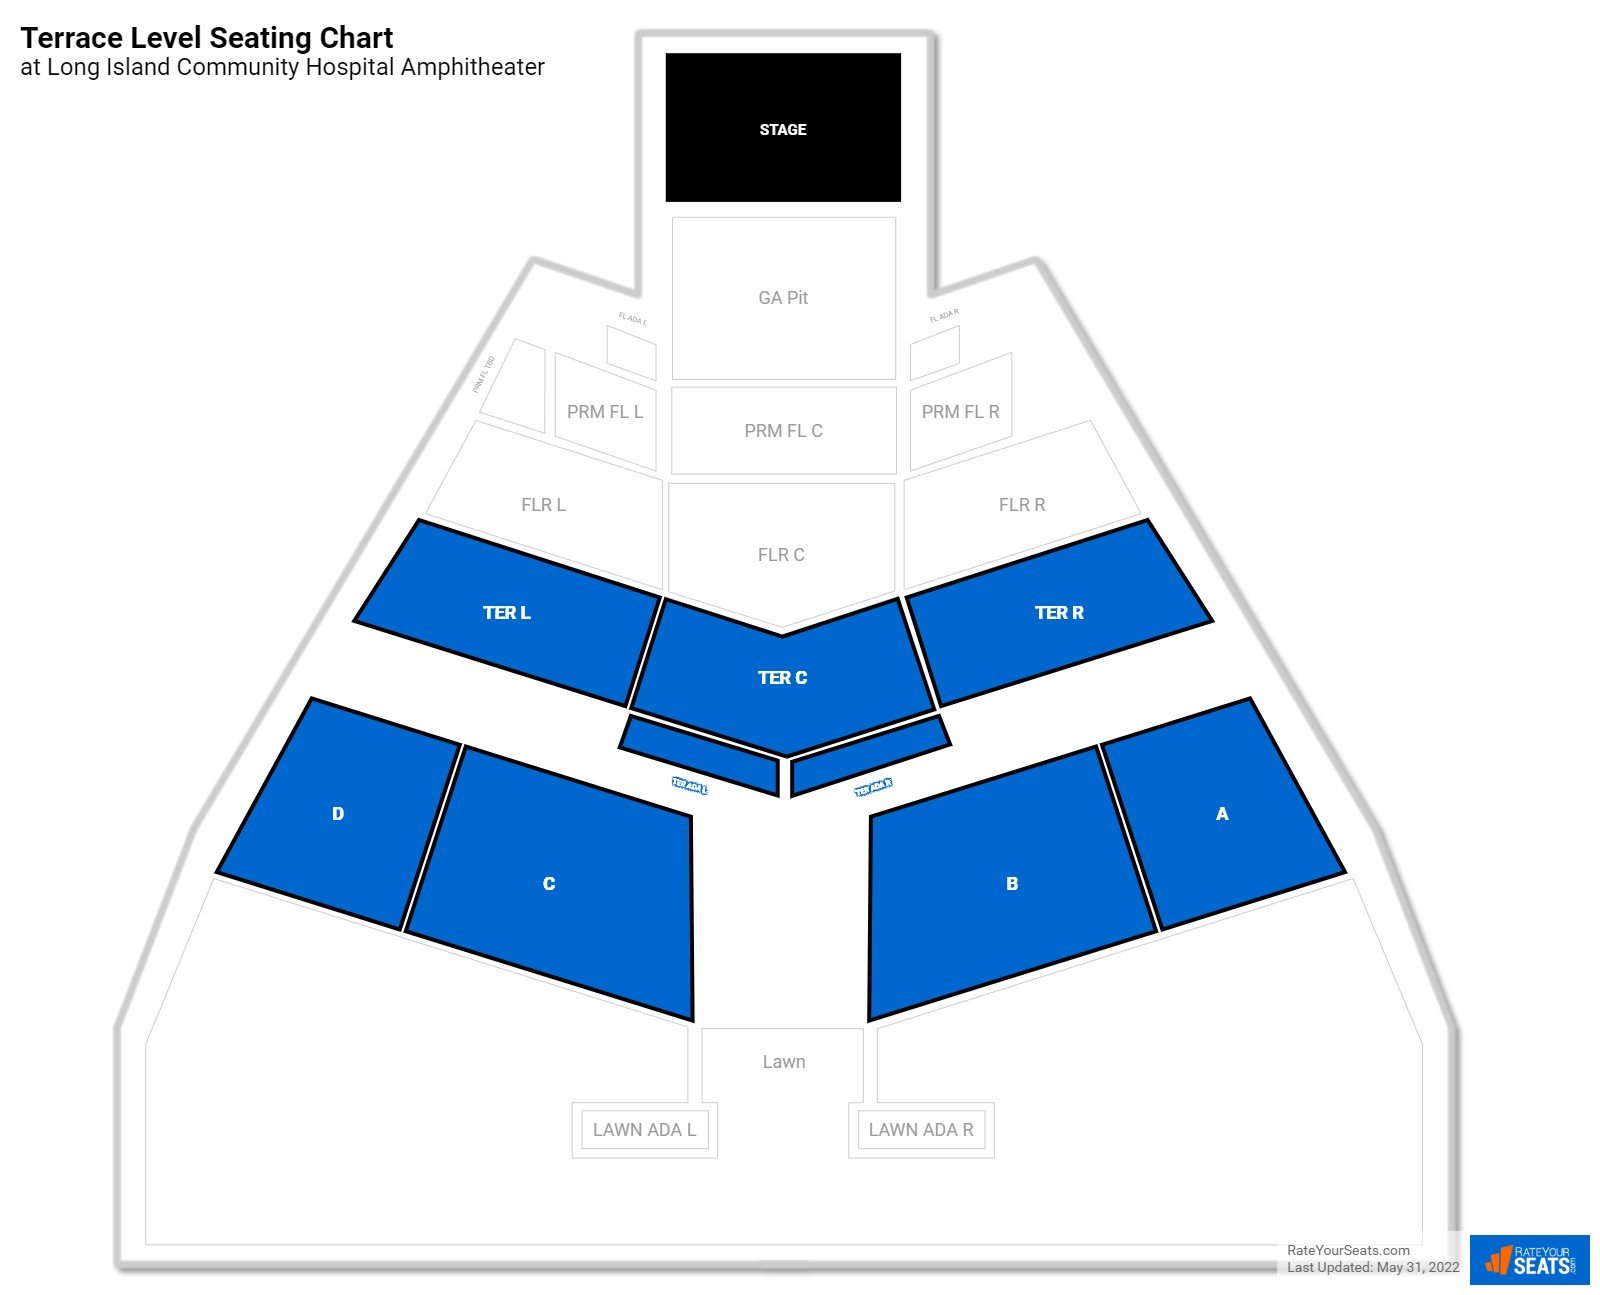 Concert Terrace Level Seating Chart at Amphitheater at Bald Hill